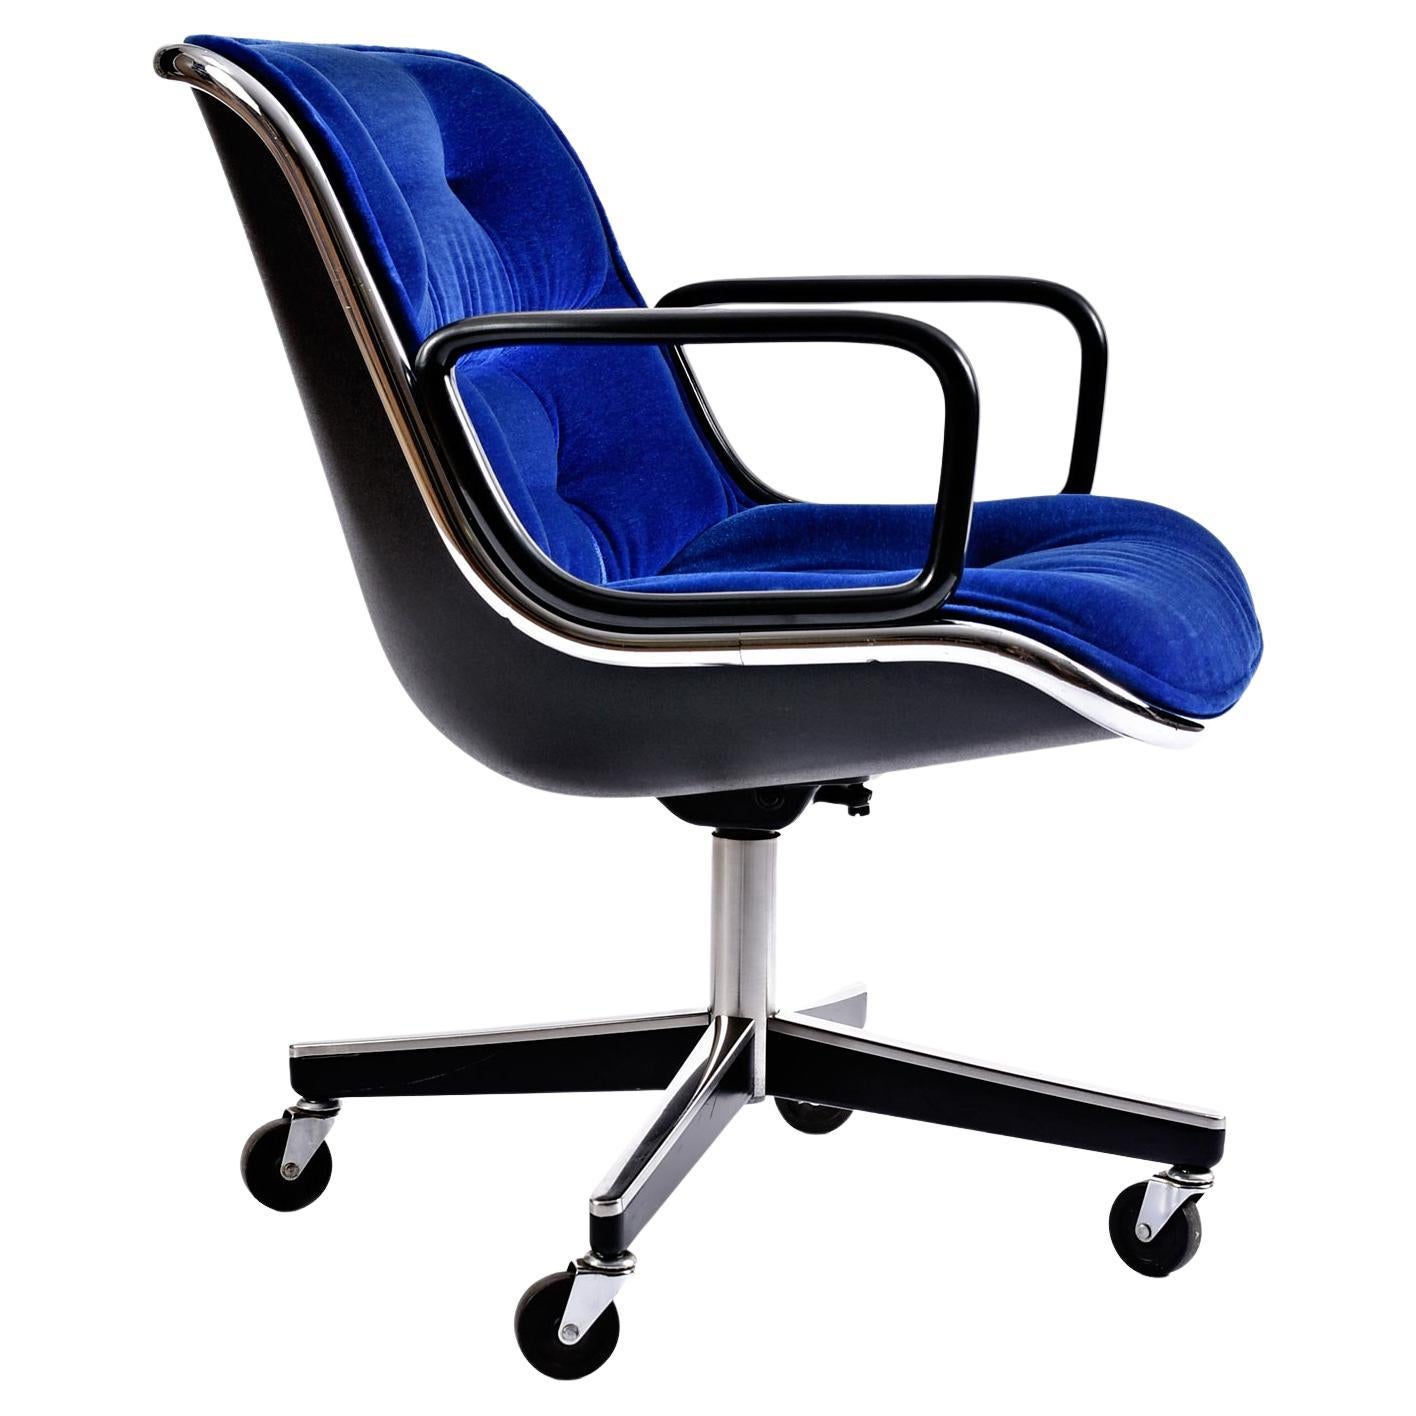 I don't think there could be a cooler color / fabric combination Pollock chair in existence. The blue velour looks both original and in exceptional condition. The chrome edge band seals the deal. This chair vibrates with uber-swank mojo. It is truly